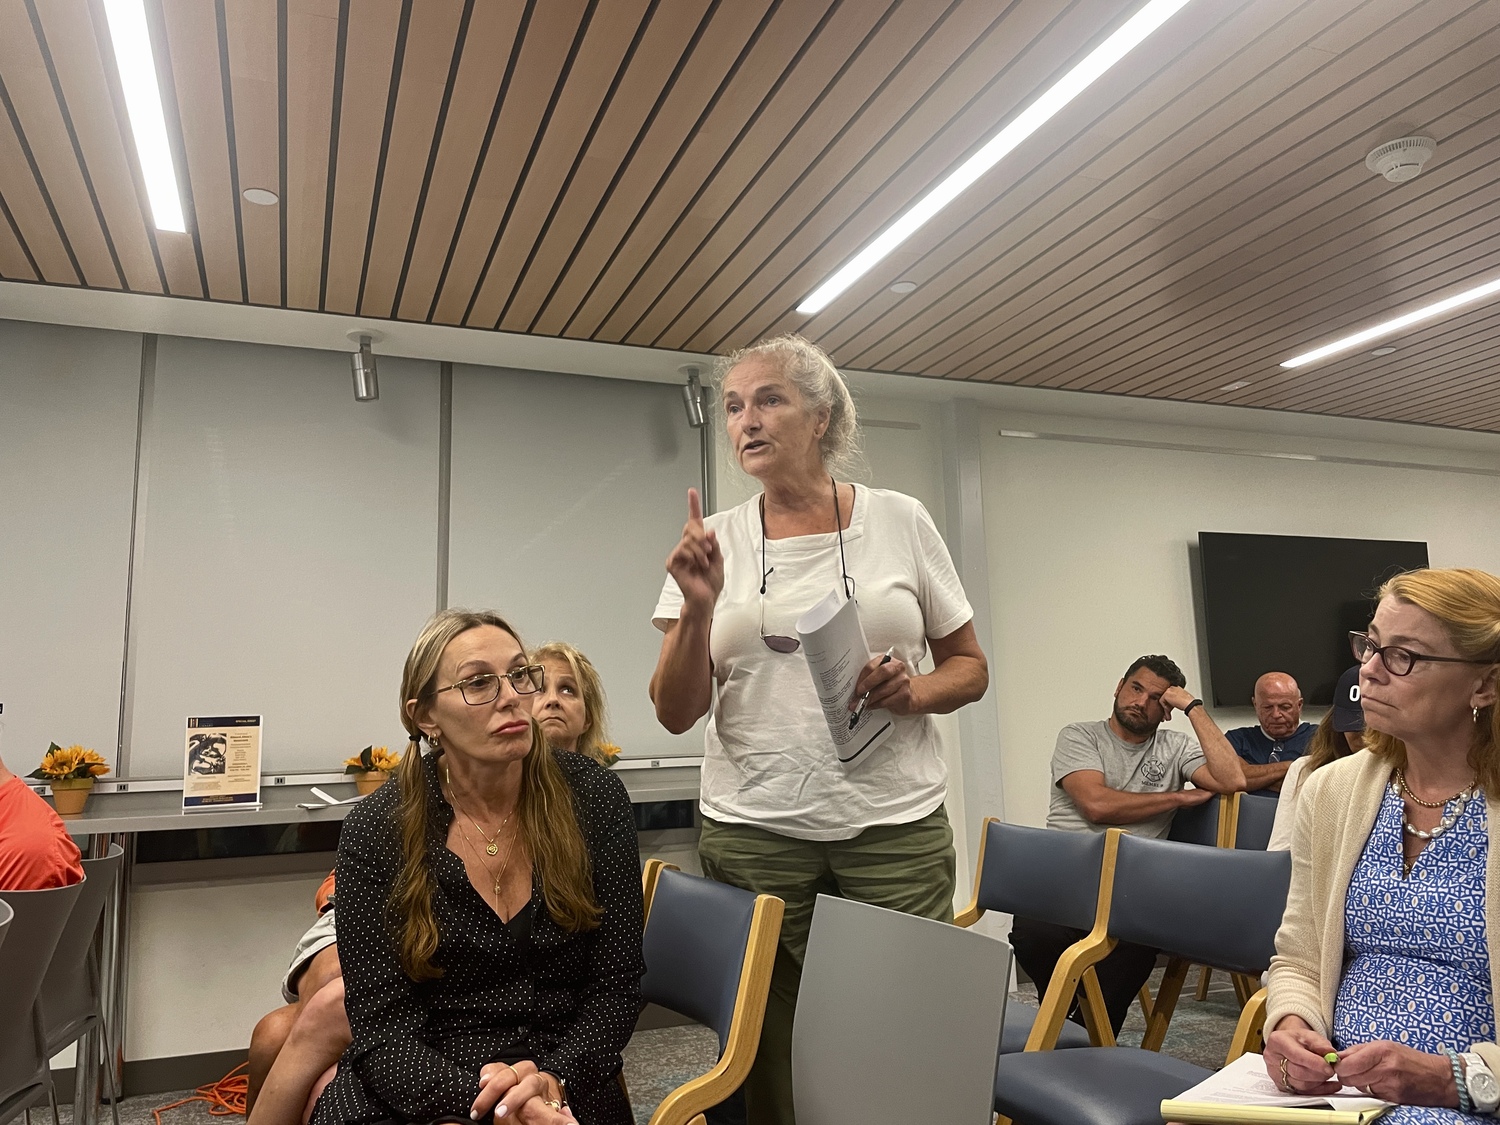 Jeannie Nielsen, whose family owns a collection of small cottages adjacent to the Benson Reserve and was among the plaintiffs in a lawsuit that led to the property being donated to East Hampton Town, said that putting temporary fences in parts of the reserve to corral goats grazing on invasive plant species would violate the terms of the lawsuit settlement. 
MICHAEL WRIGHT